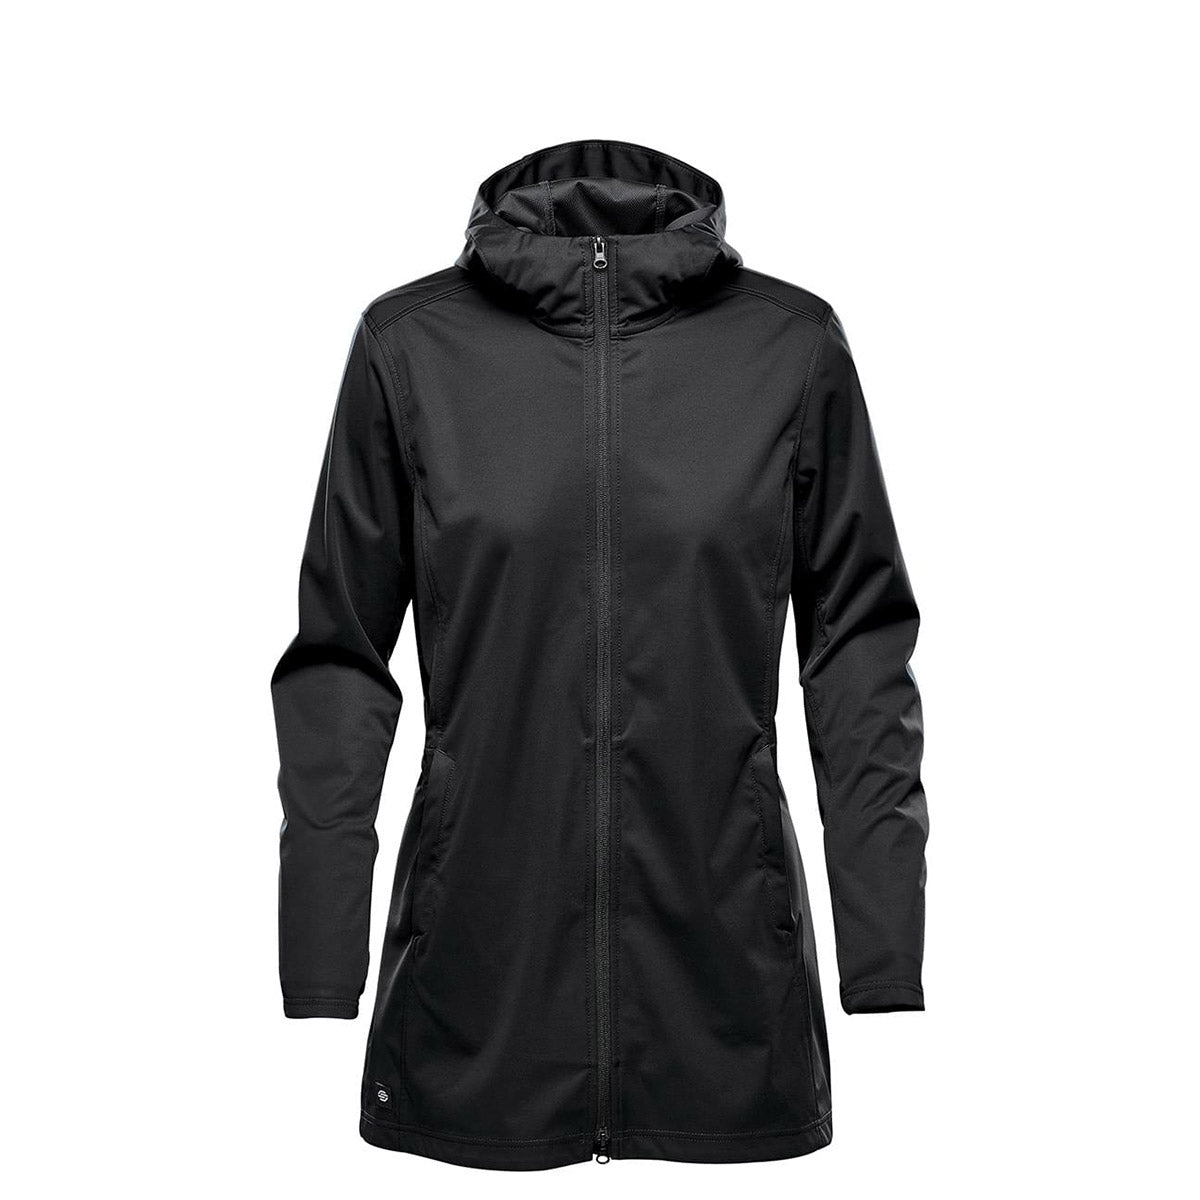 Iveco Collection. Chaqueta softshell Mujer Turbostar